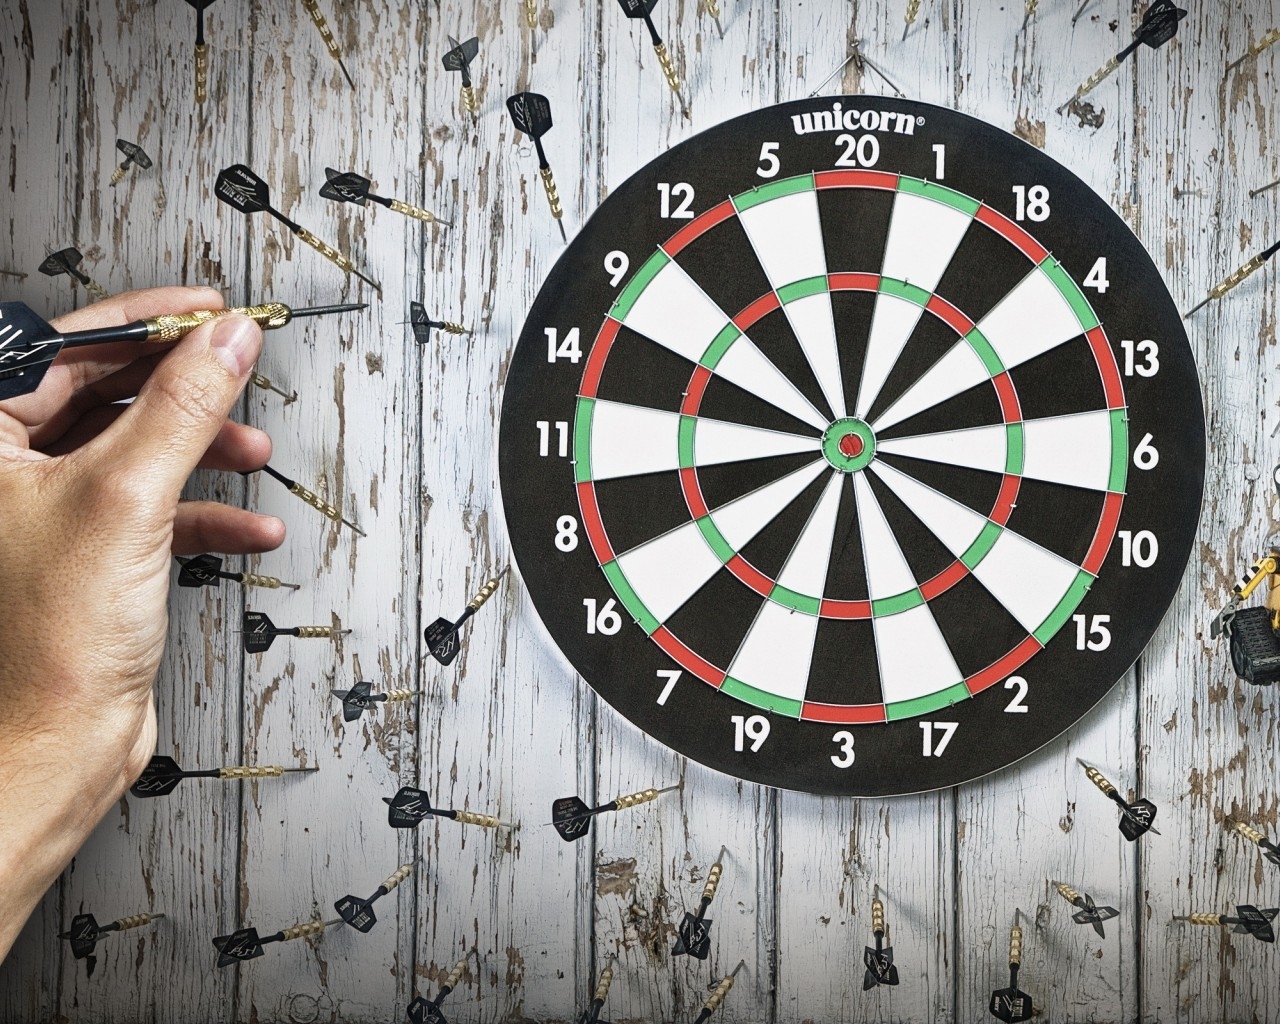 Darts Game for 1280 x 1024 resolution